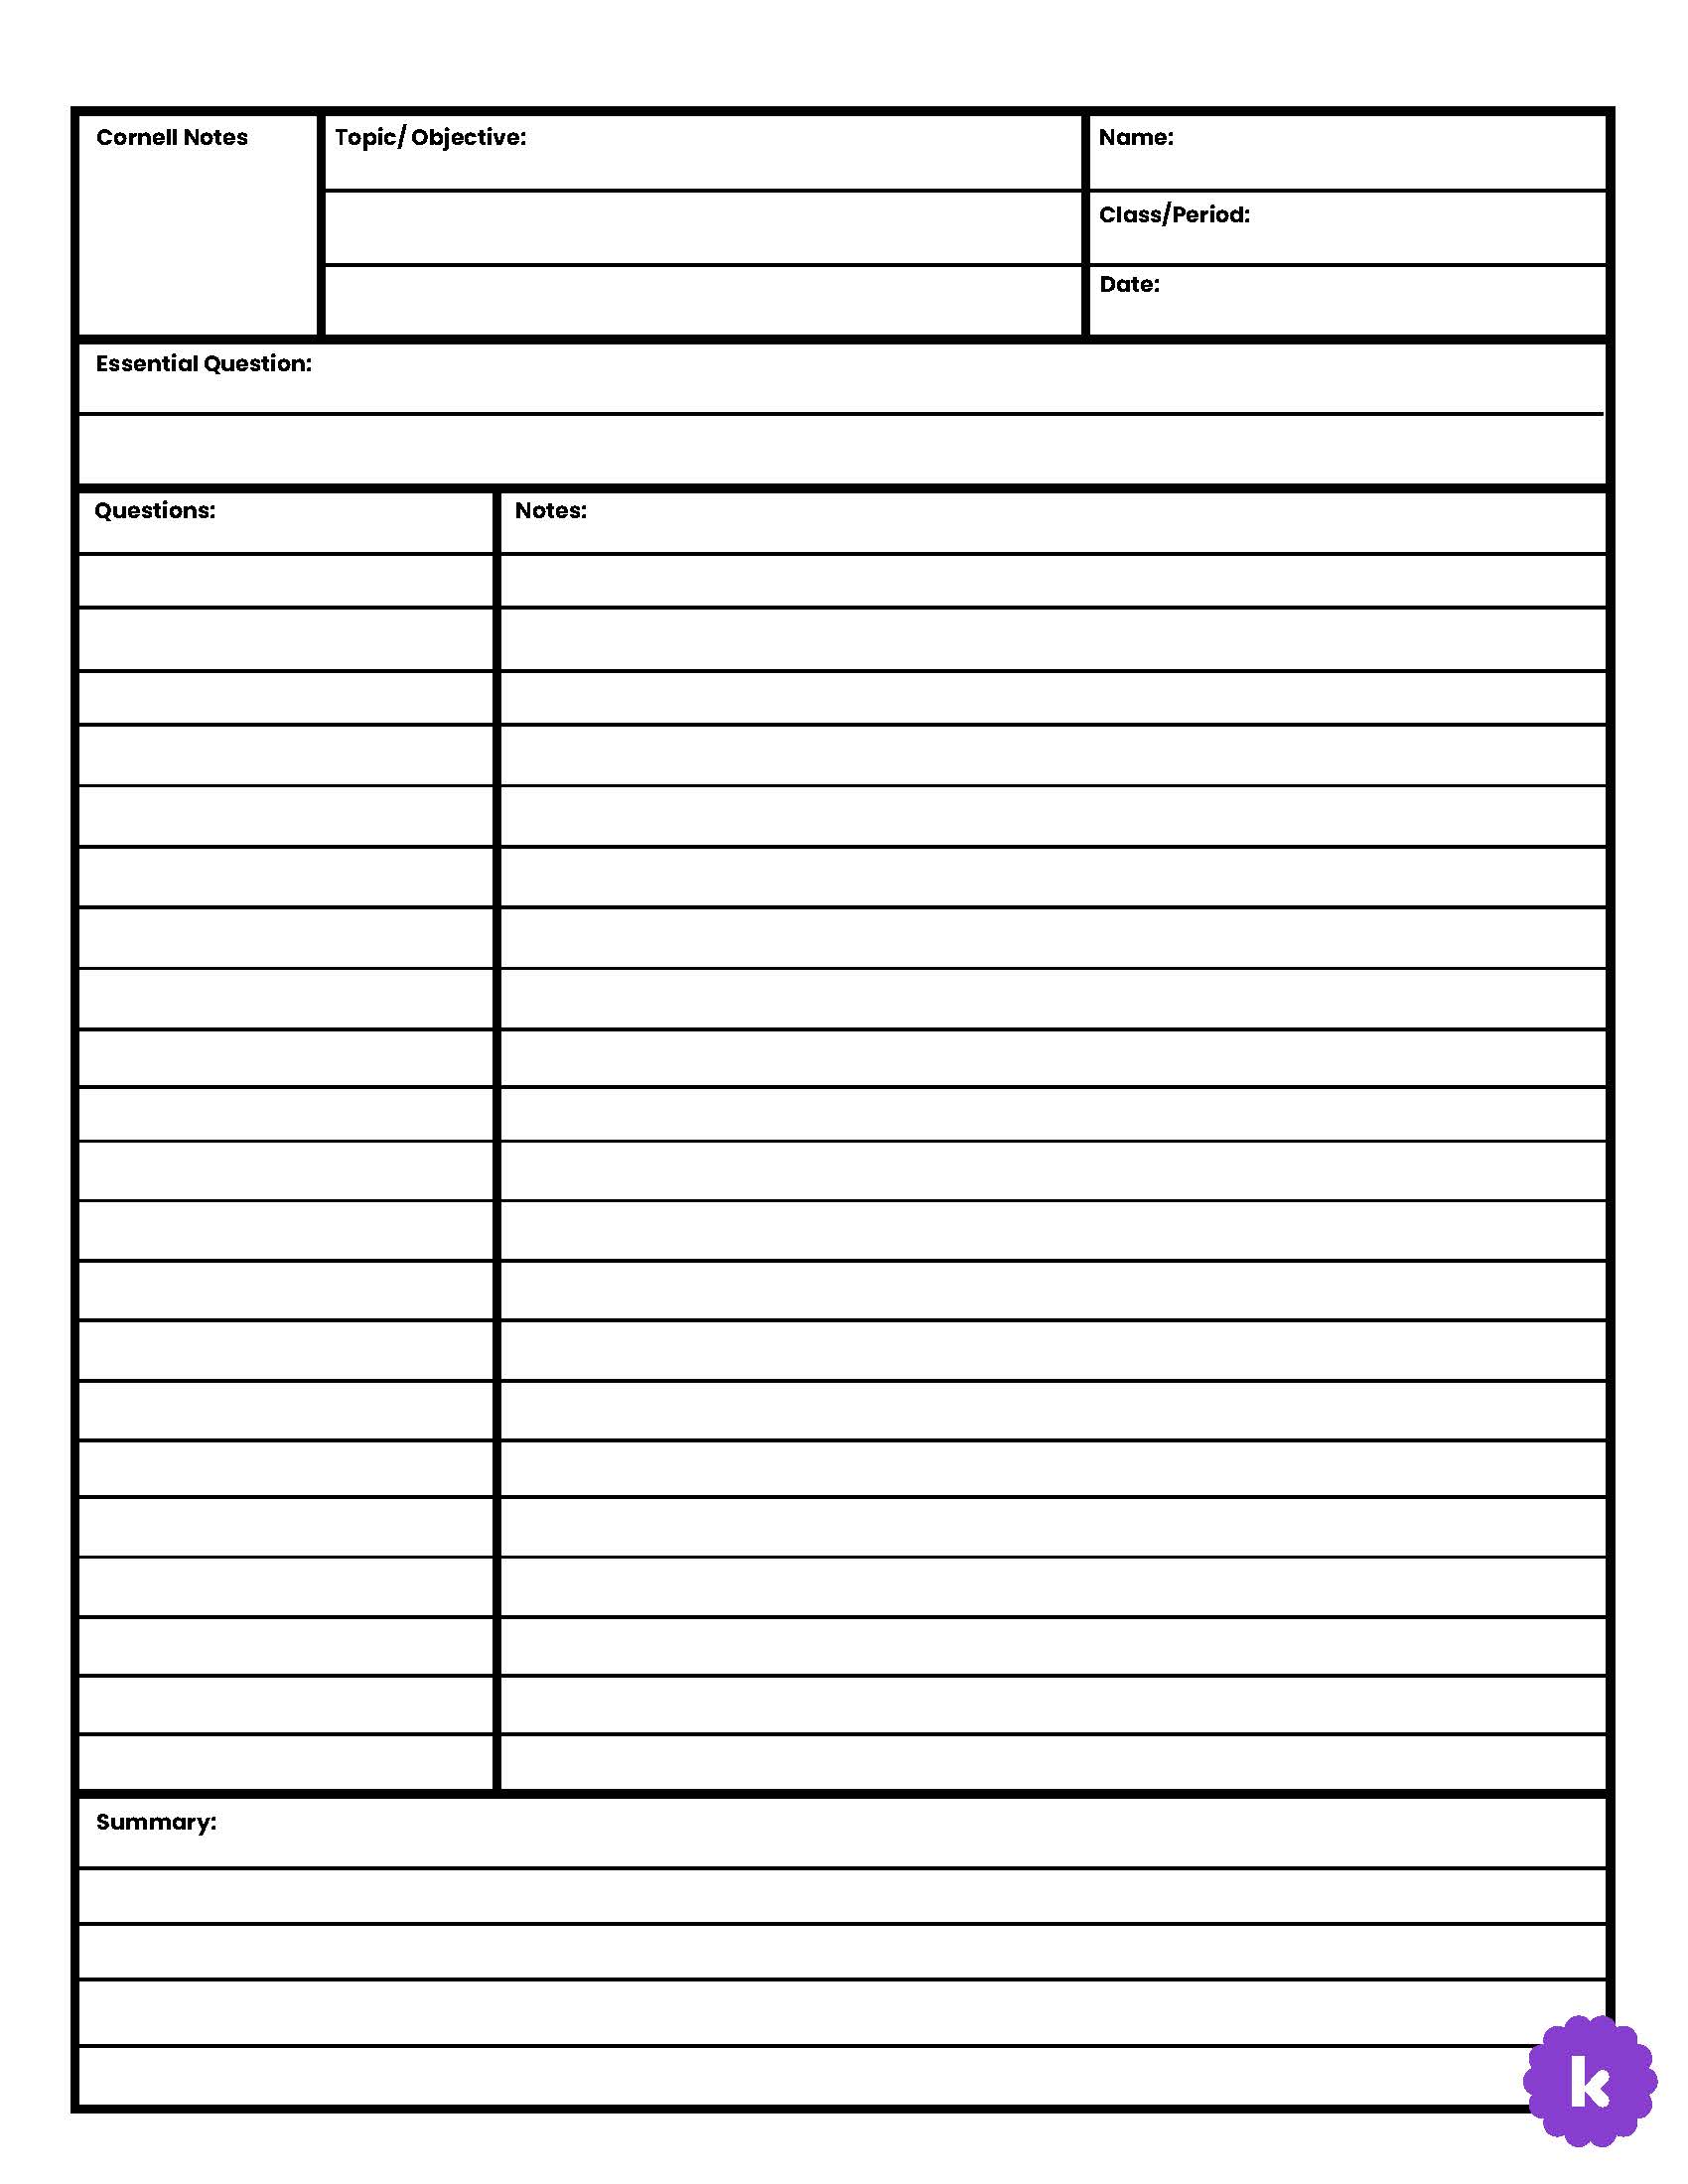 cornell-notes-lined-for-teachers-perfect-for-grades-10th-11th